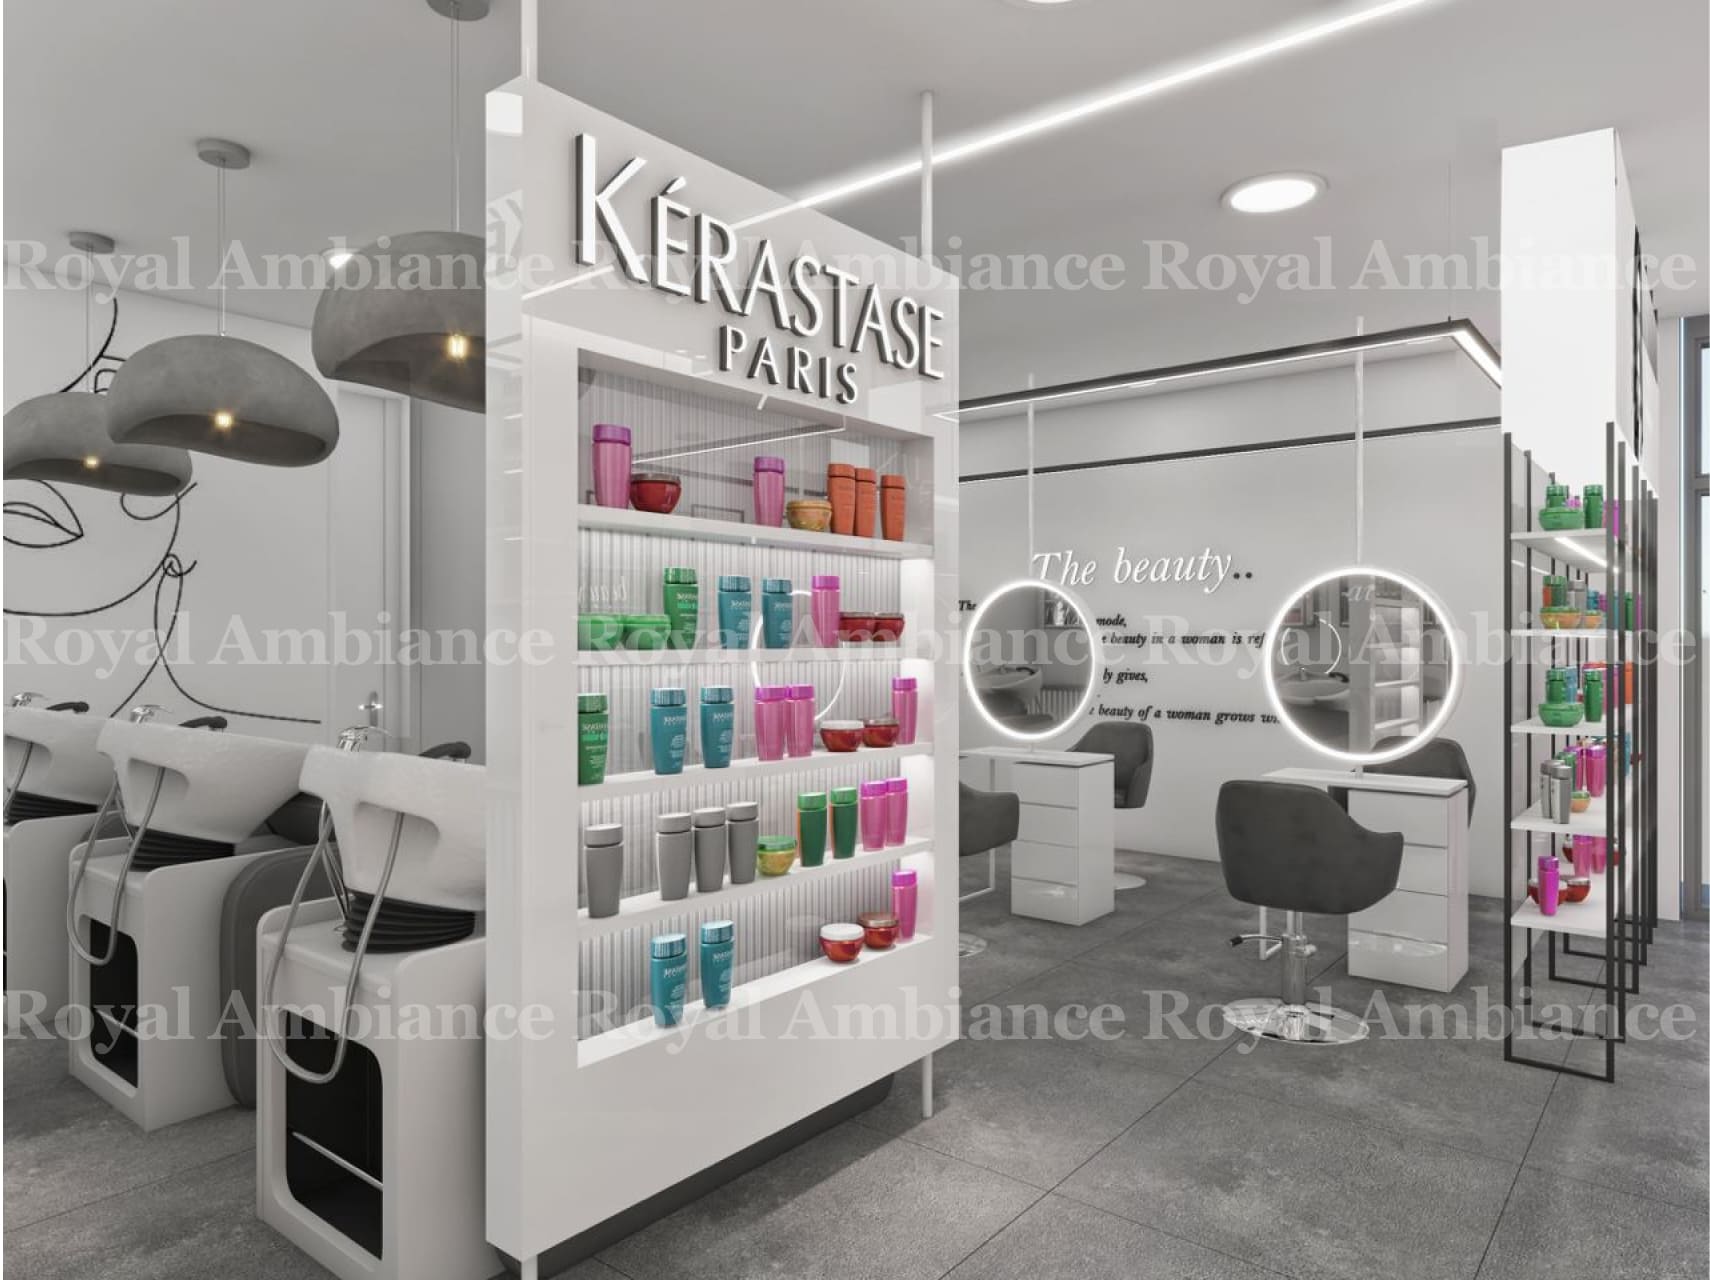 Beaute ladies salon design fit-out and joinery haircutting hairwashing area